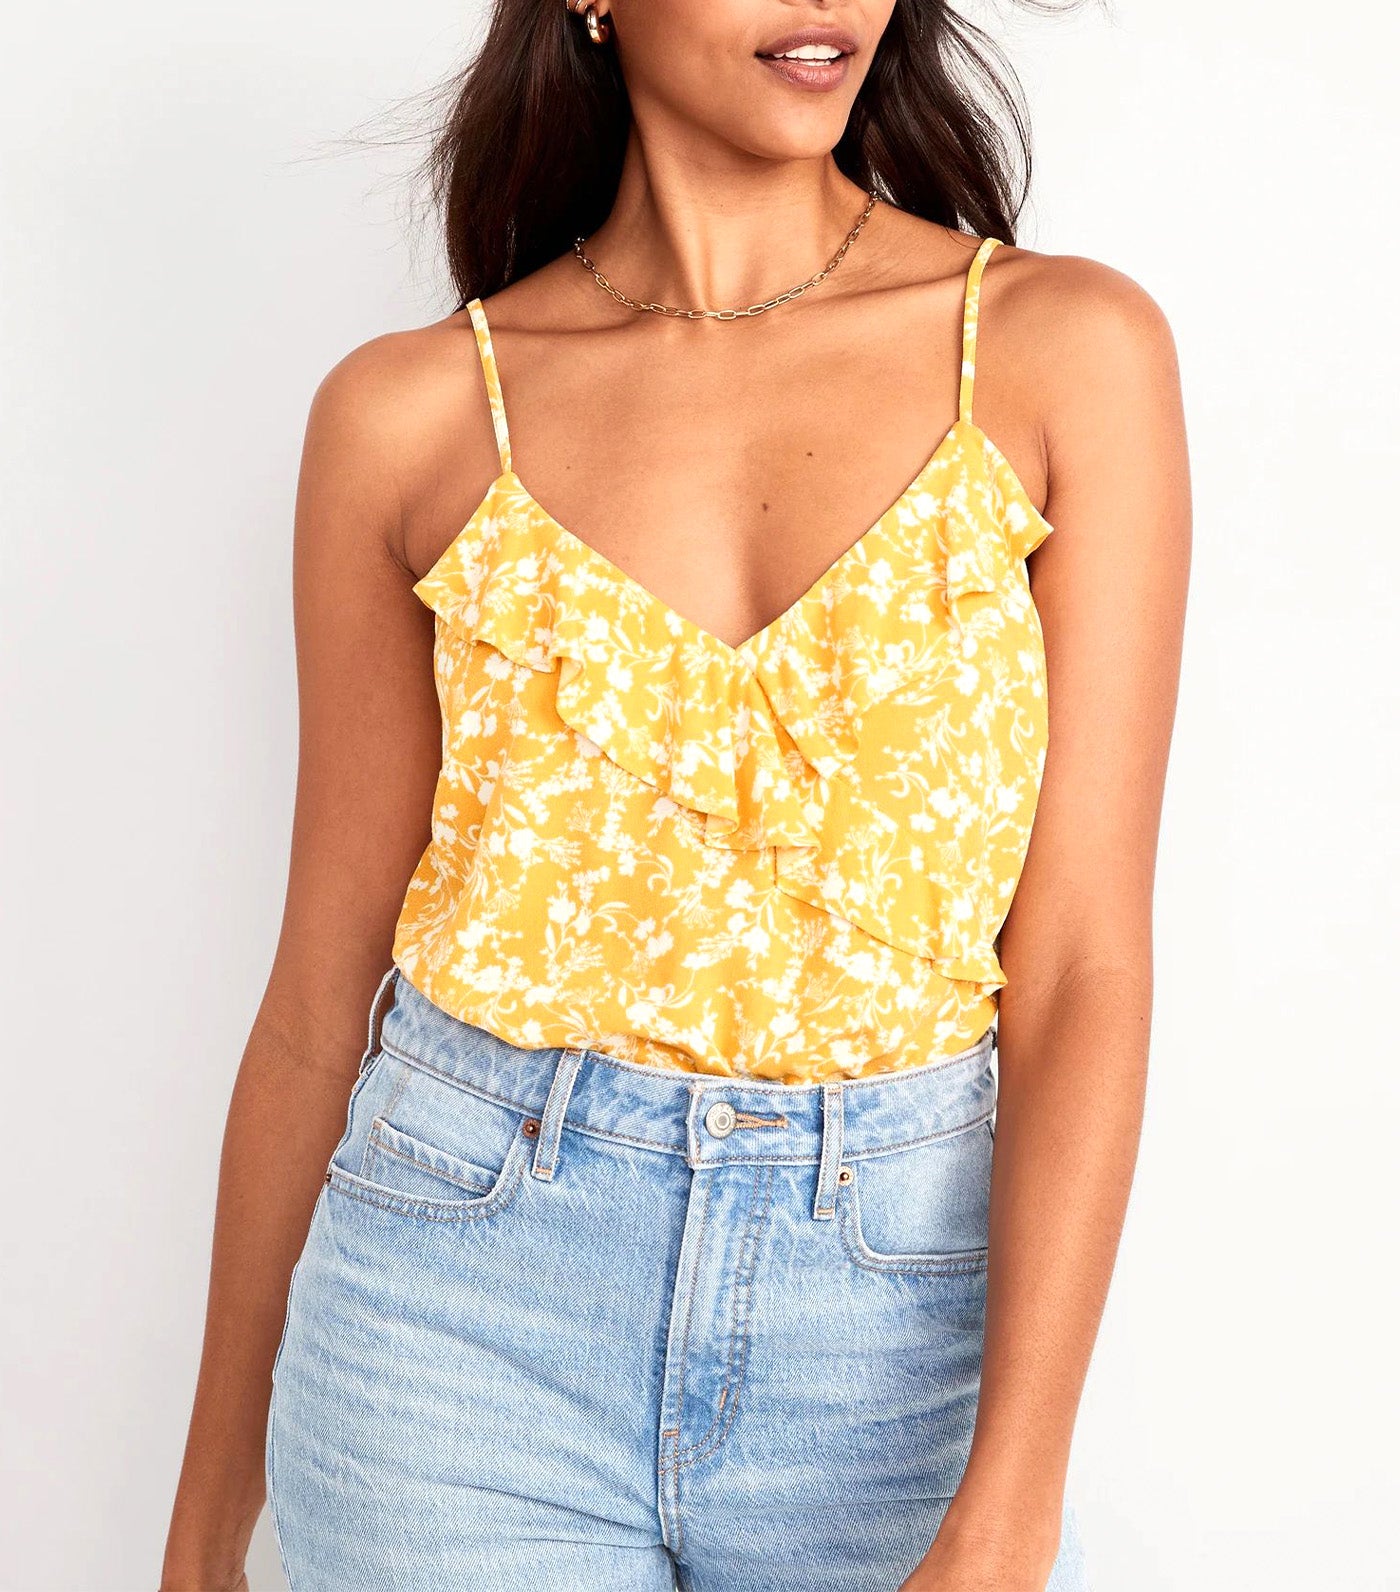 Textured Ruffled Wrap-Effect Cami Top for Women Yellow Floral